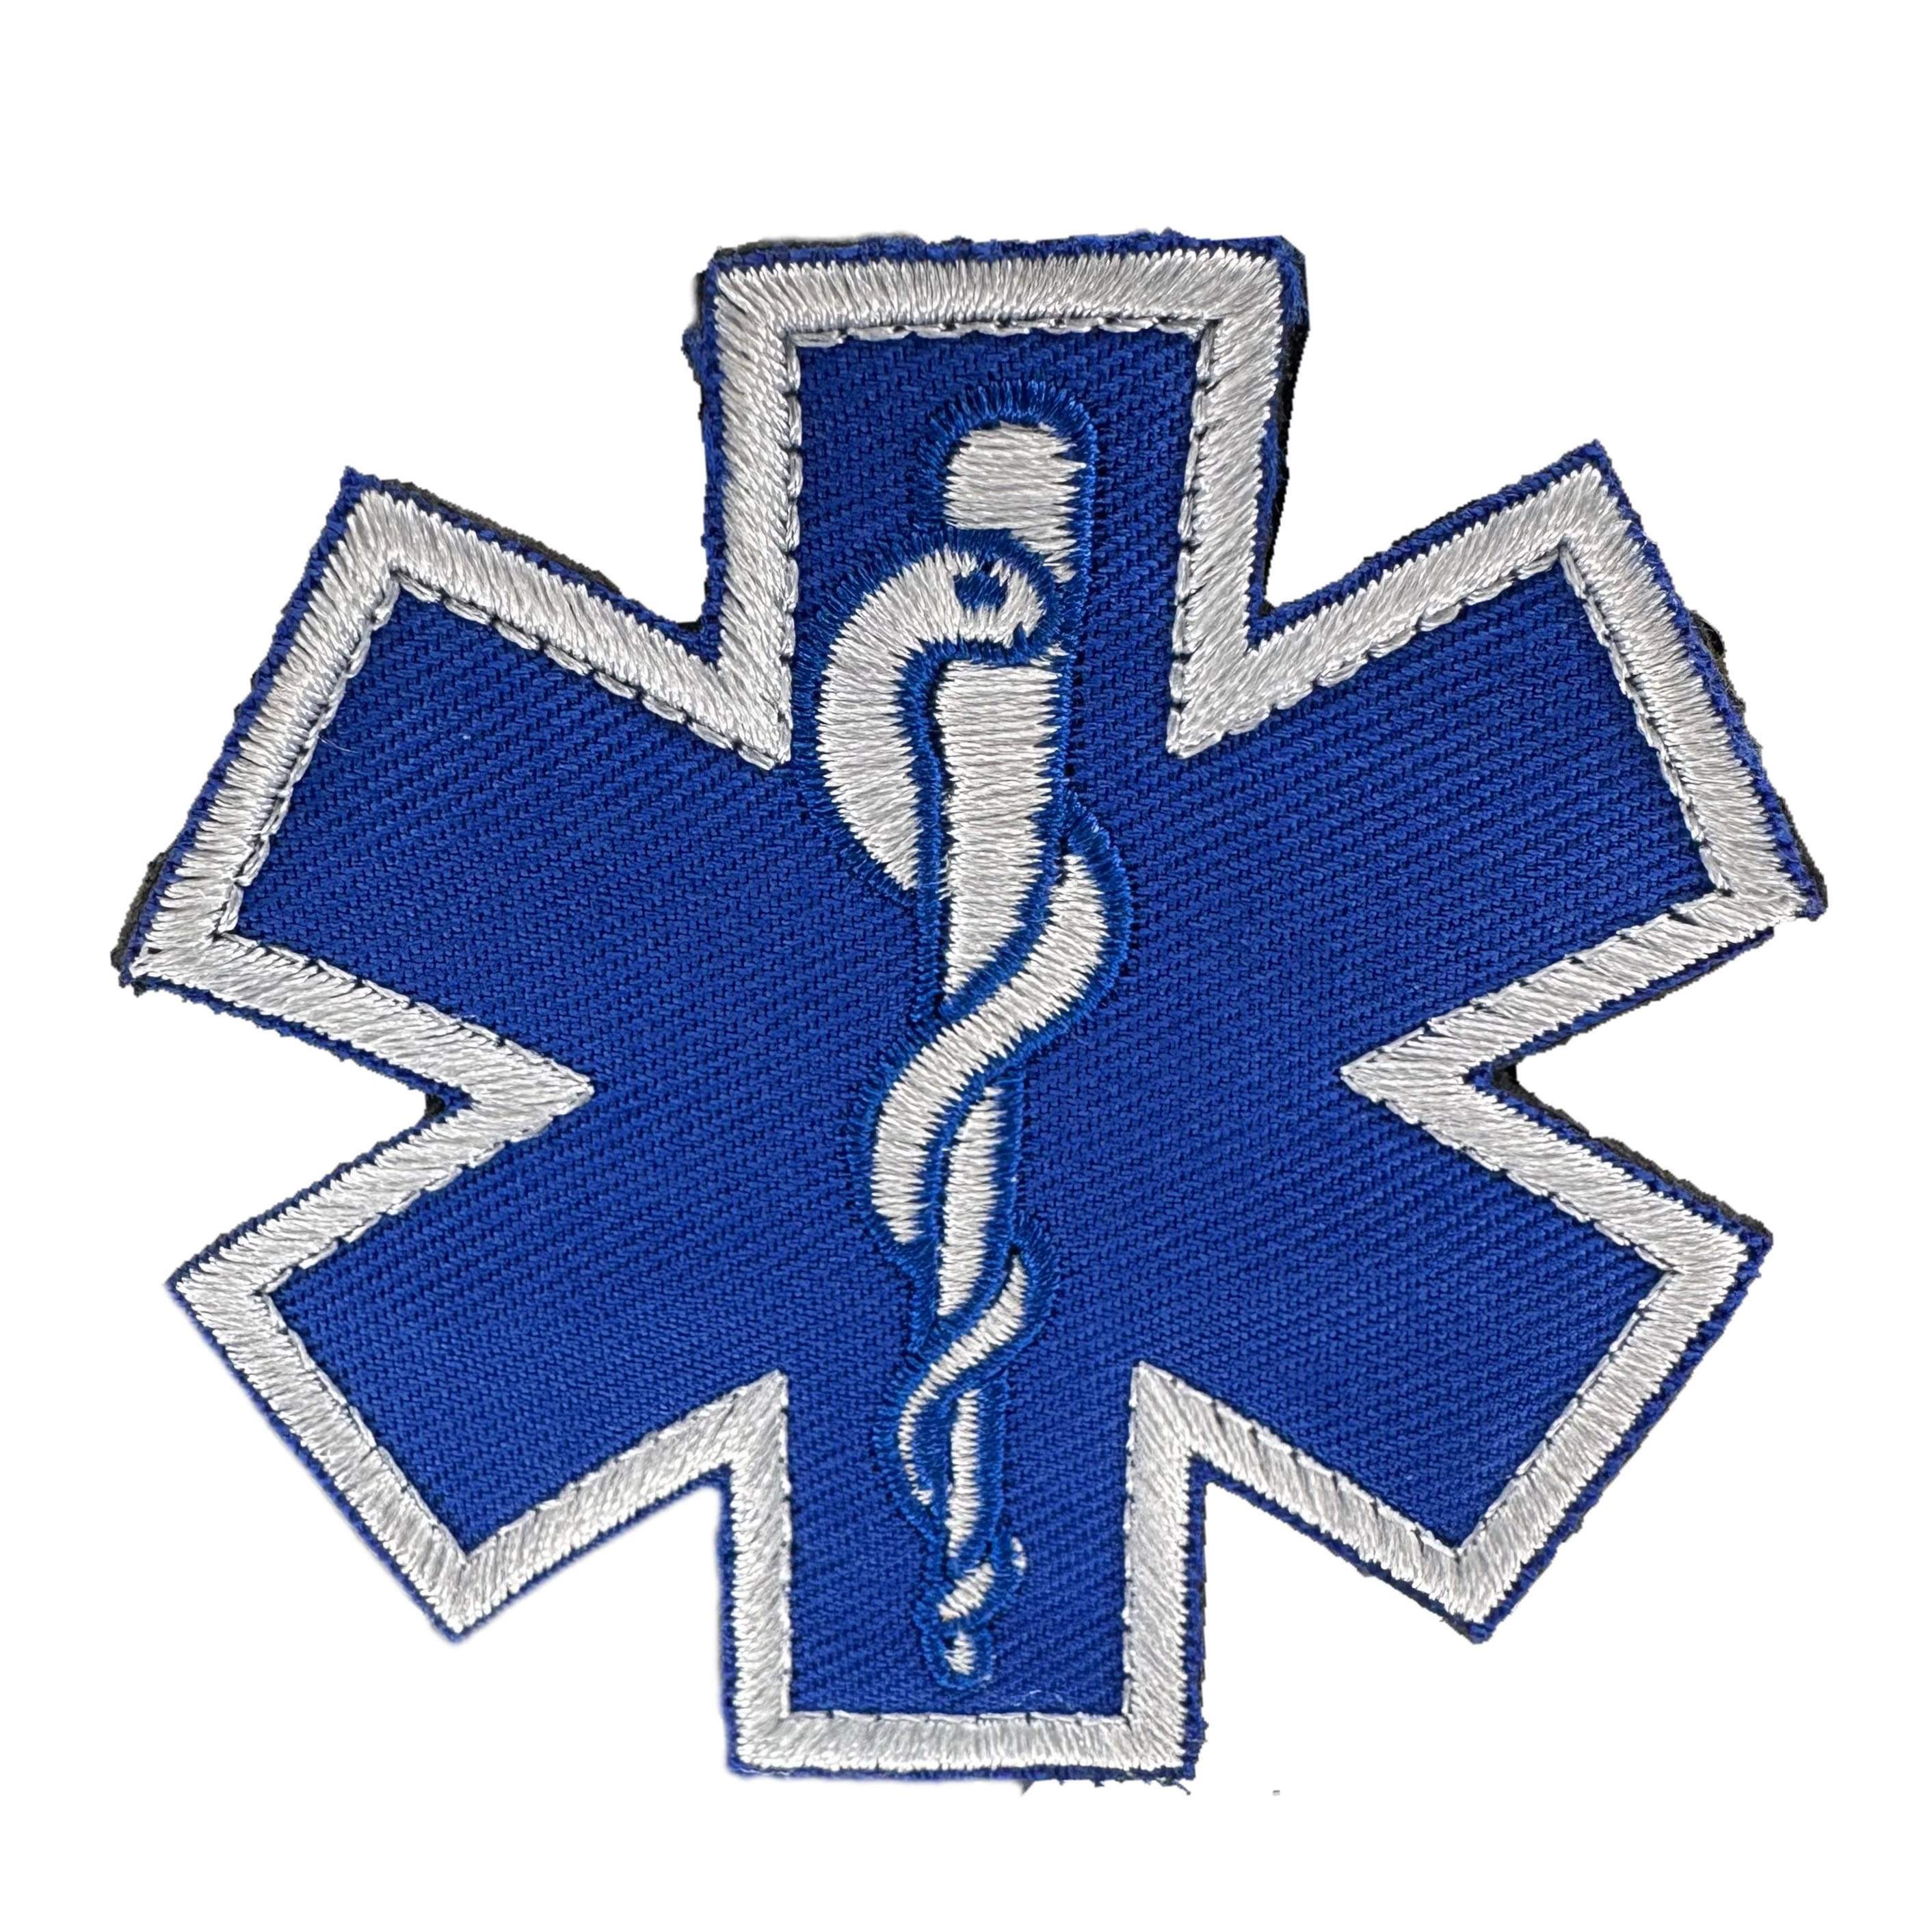 Embroidery Patch - Medical Star of Life